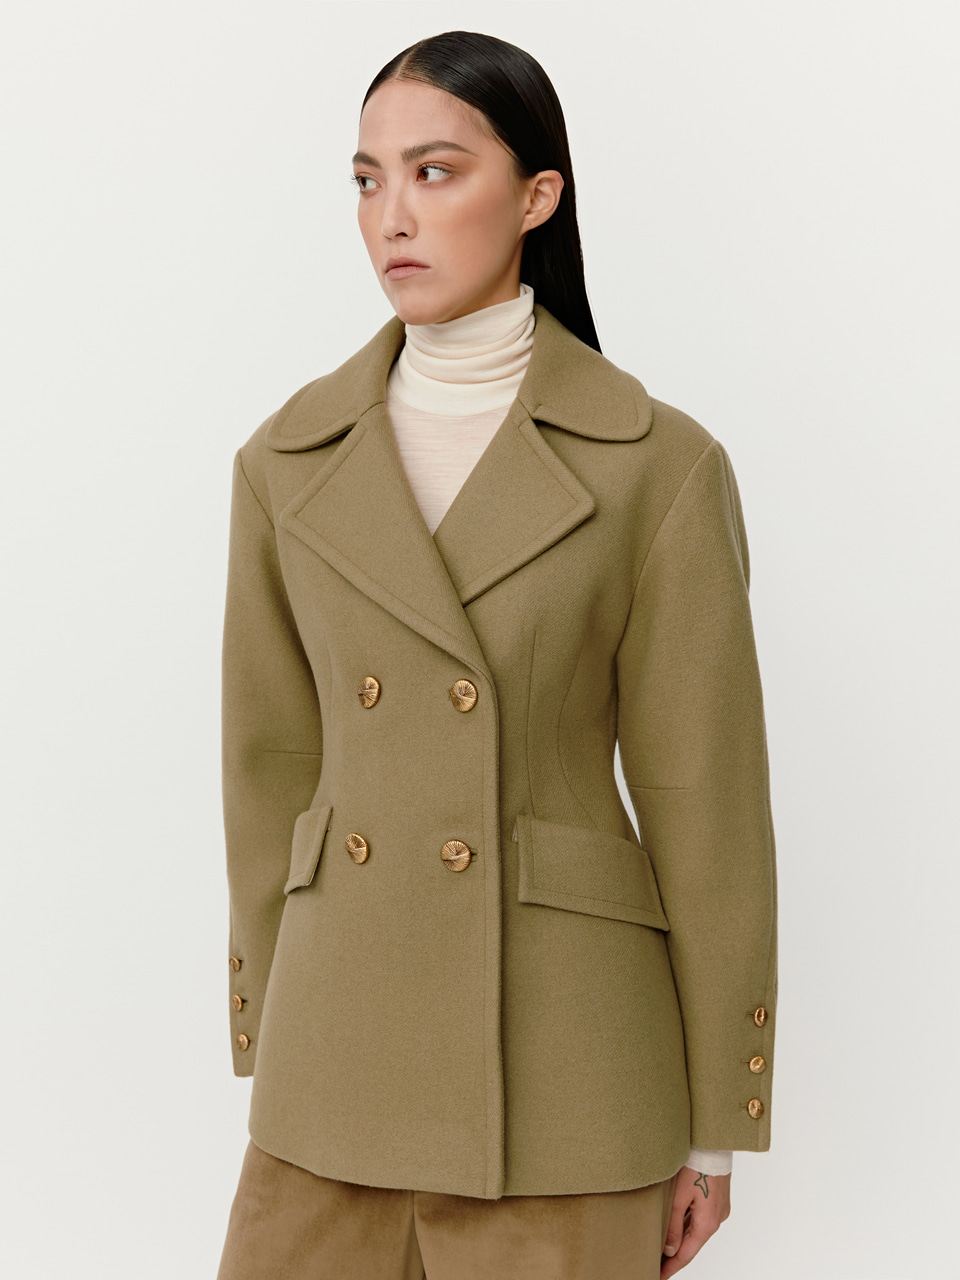 Double Breasted Wool Coat